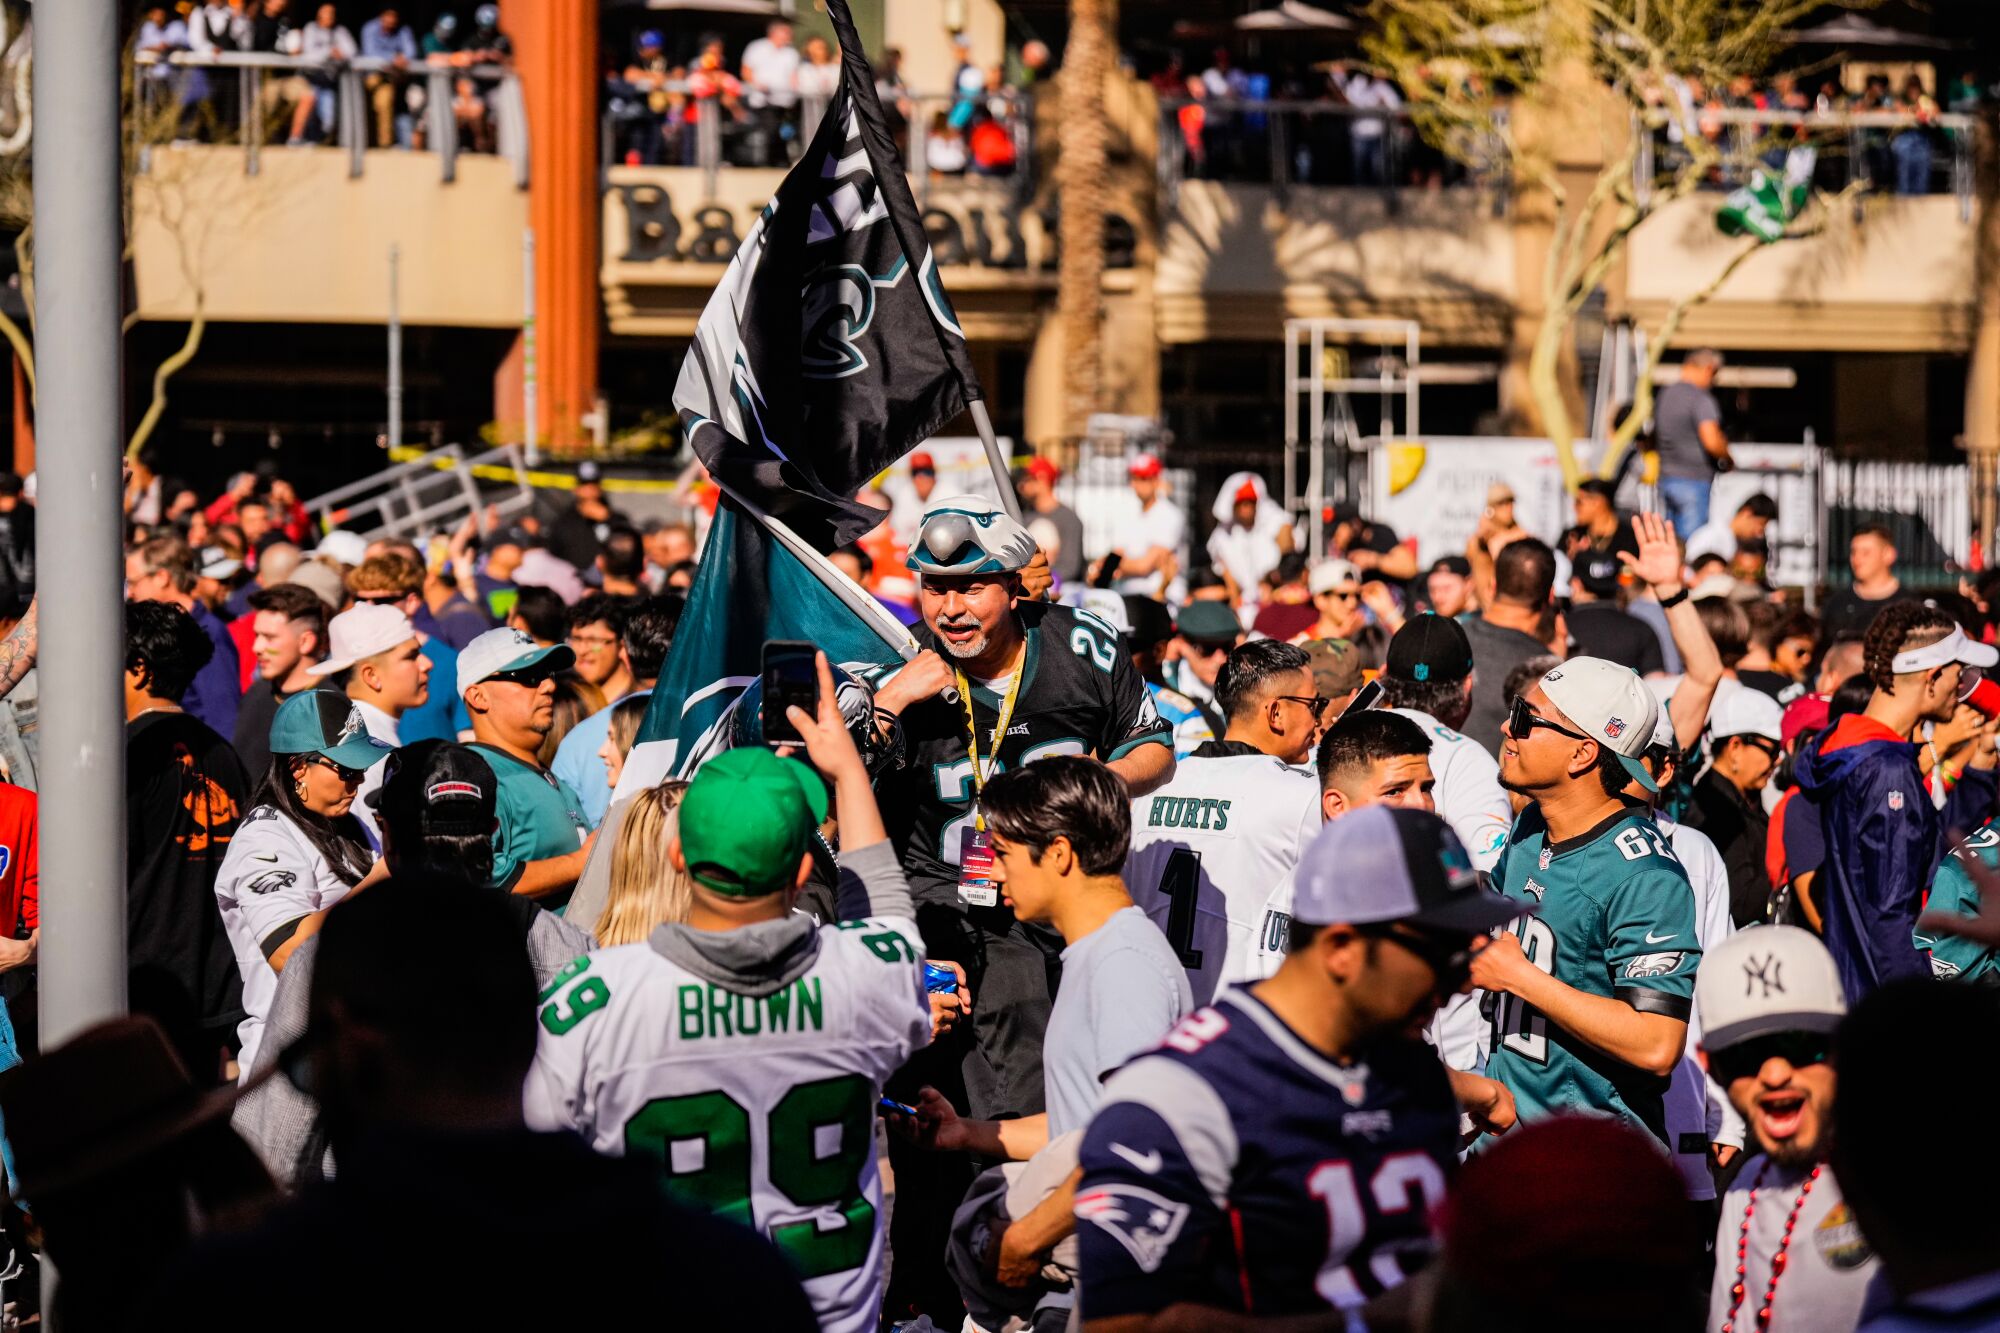 Eagles fans gather in the street outside McFadden's Restaurant and Saloon in Glendale, Ariz., before the Super Bowl.